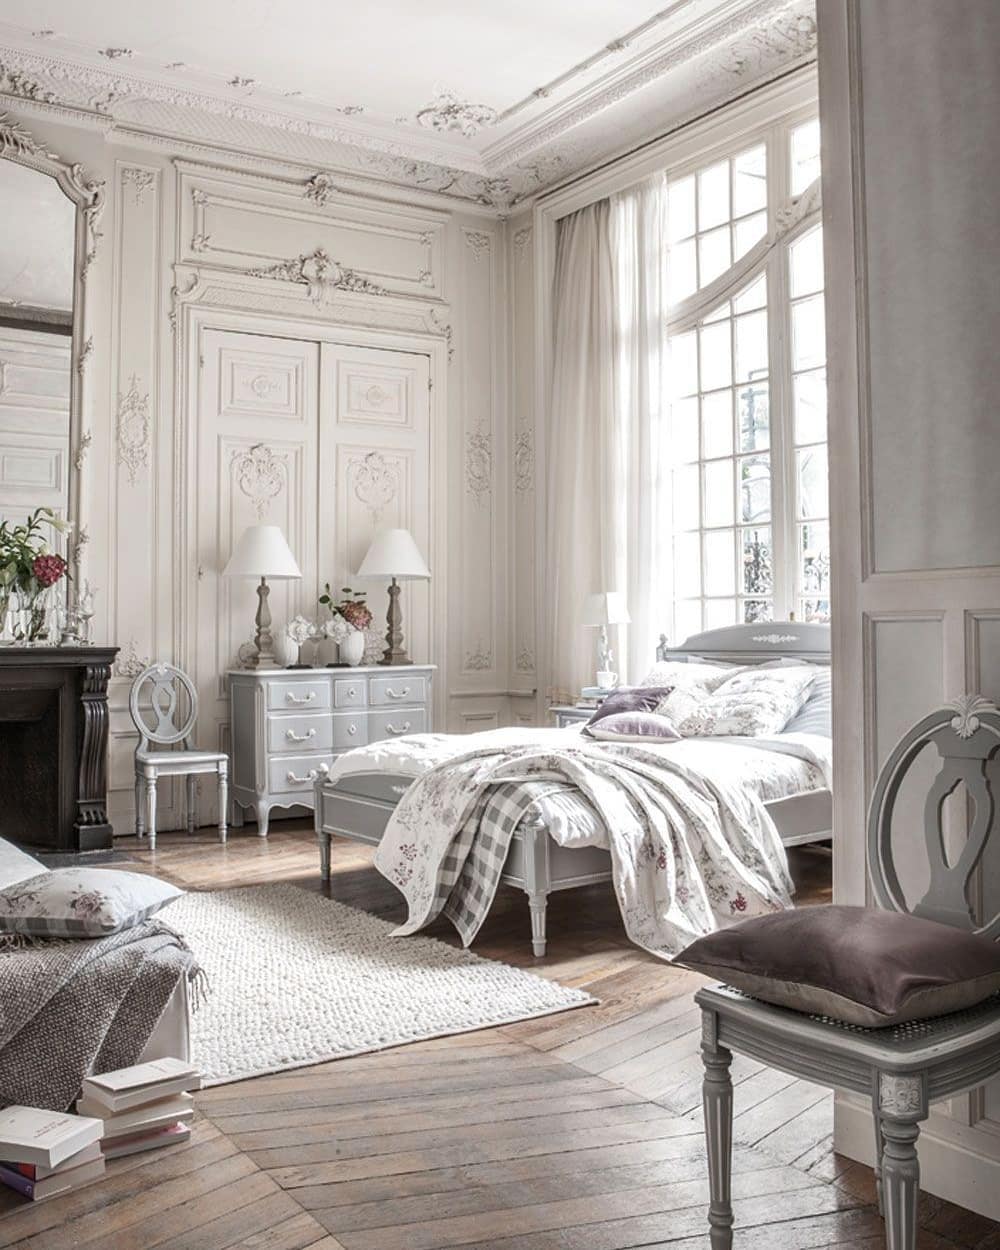 Embrace Rustic Elegance: How to Create a French Country Bedroom Retreat